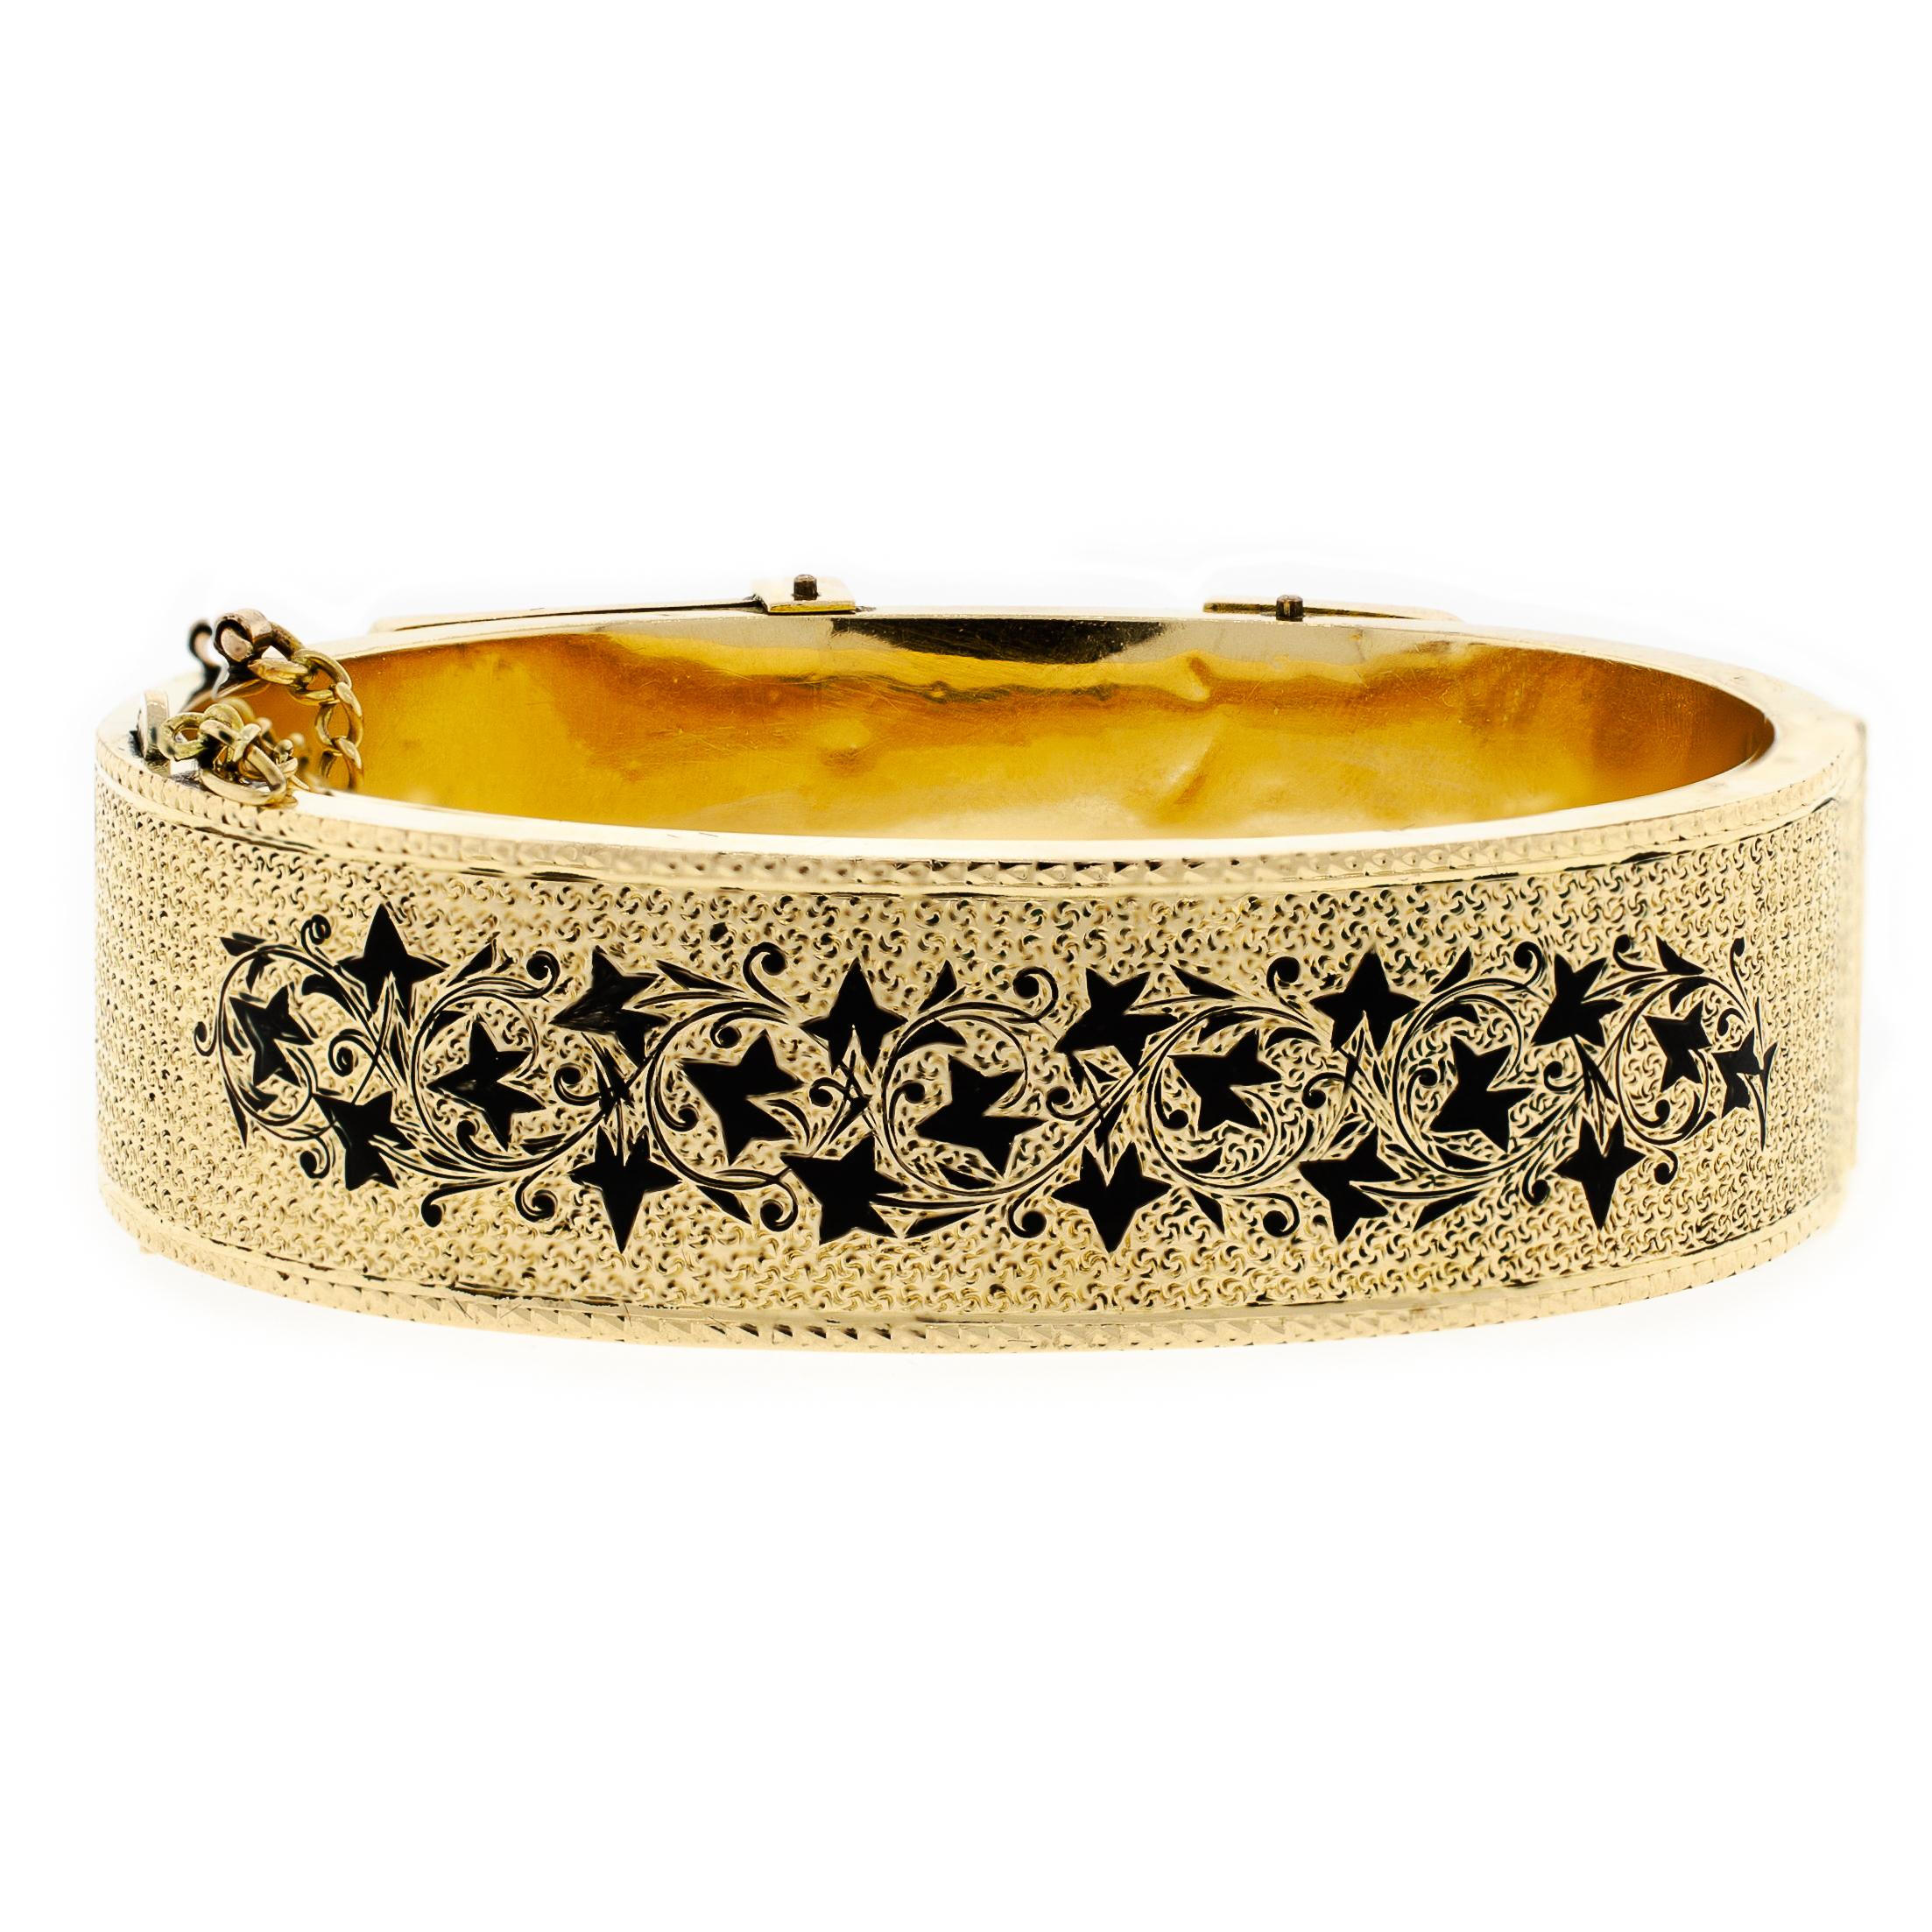 Stunning Victorian Buckle Motif Yellow Gold Buckle Bracelet In Good Condition For Sale In Wheaton, IL